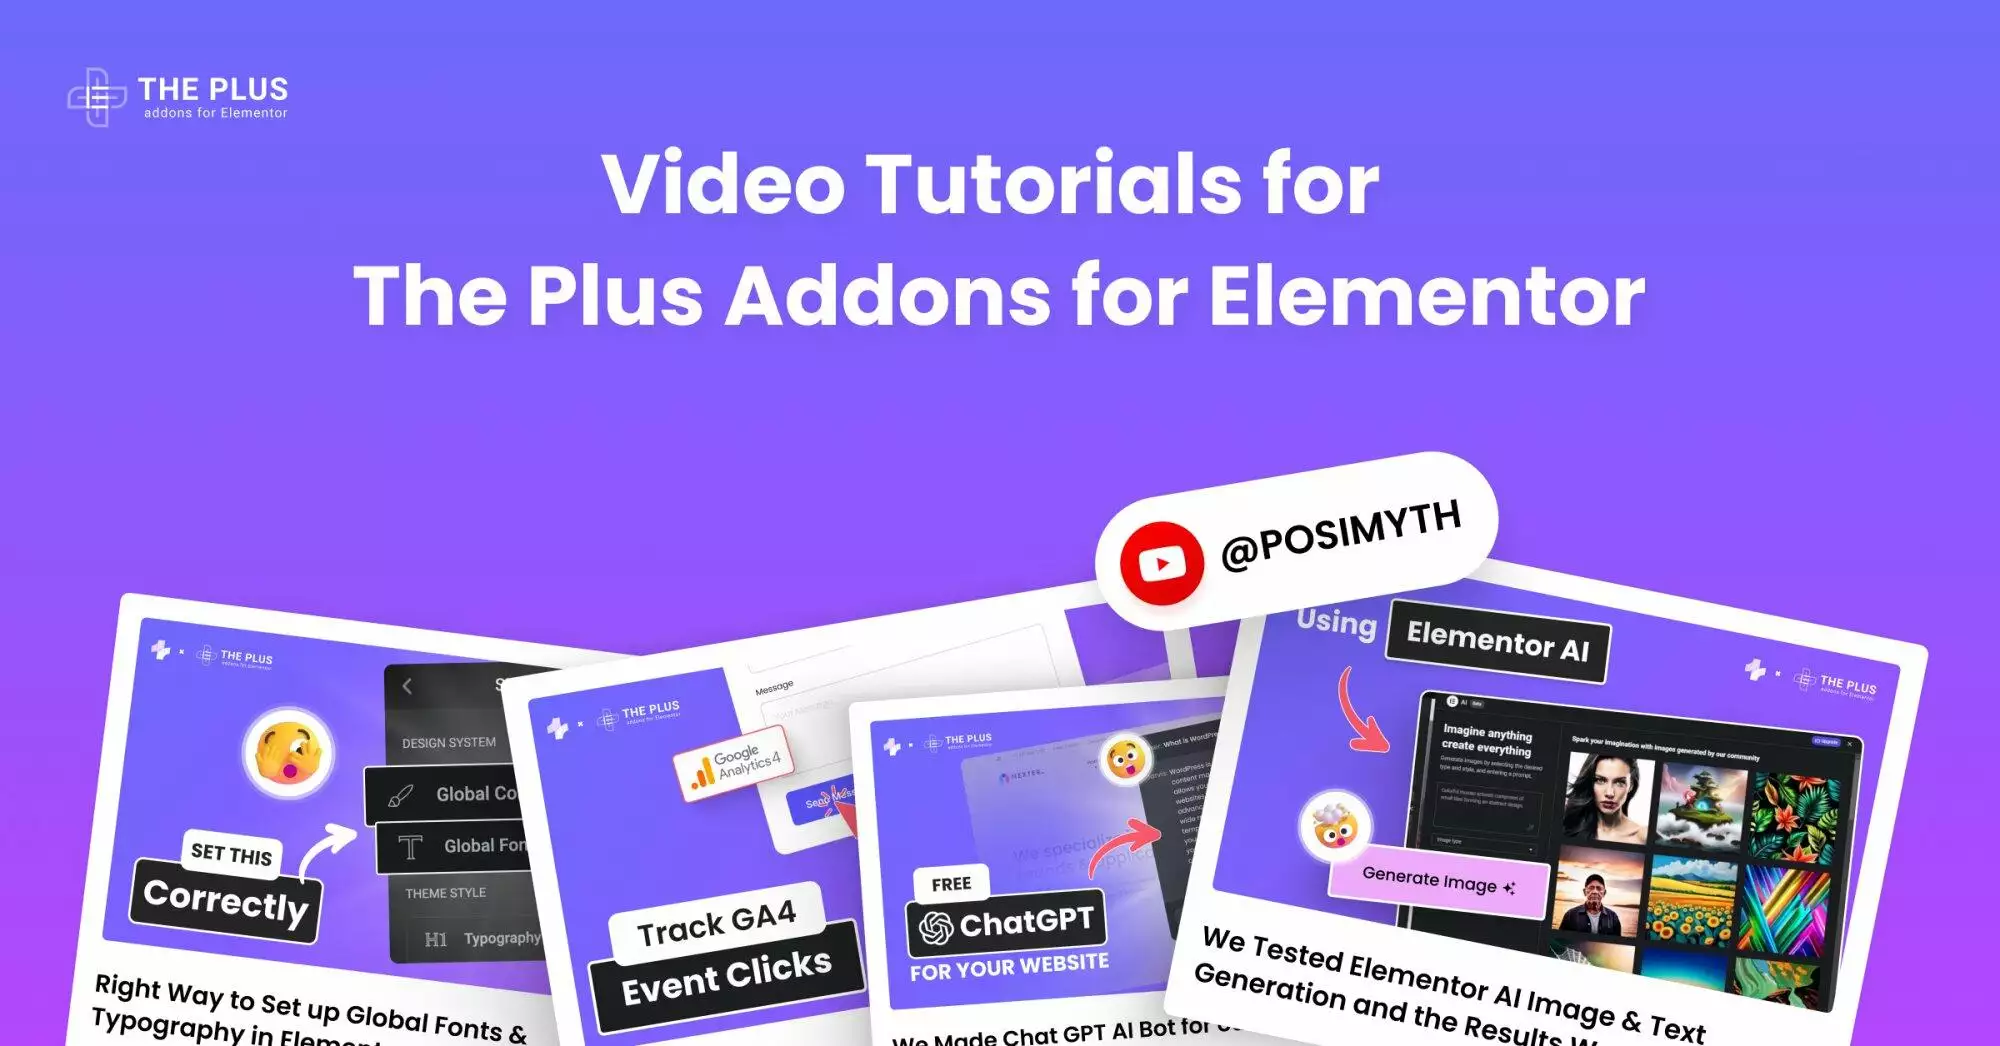 Video tutorials for the plus addons for elementor video tutorials for the plus addons for elementor from the plus addons for elementor